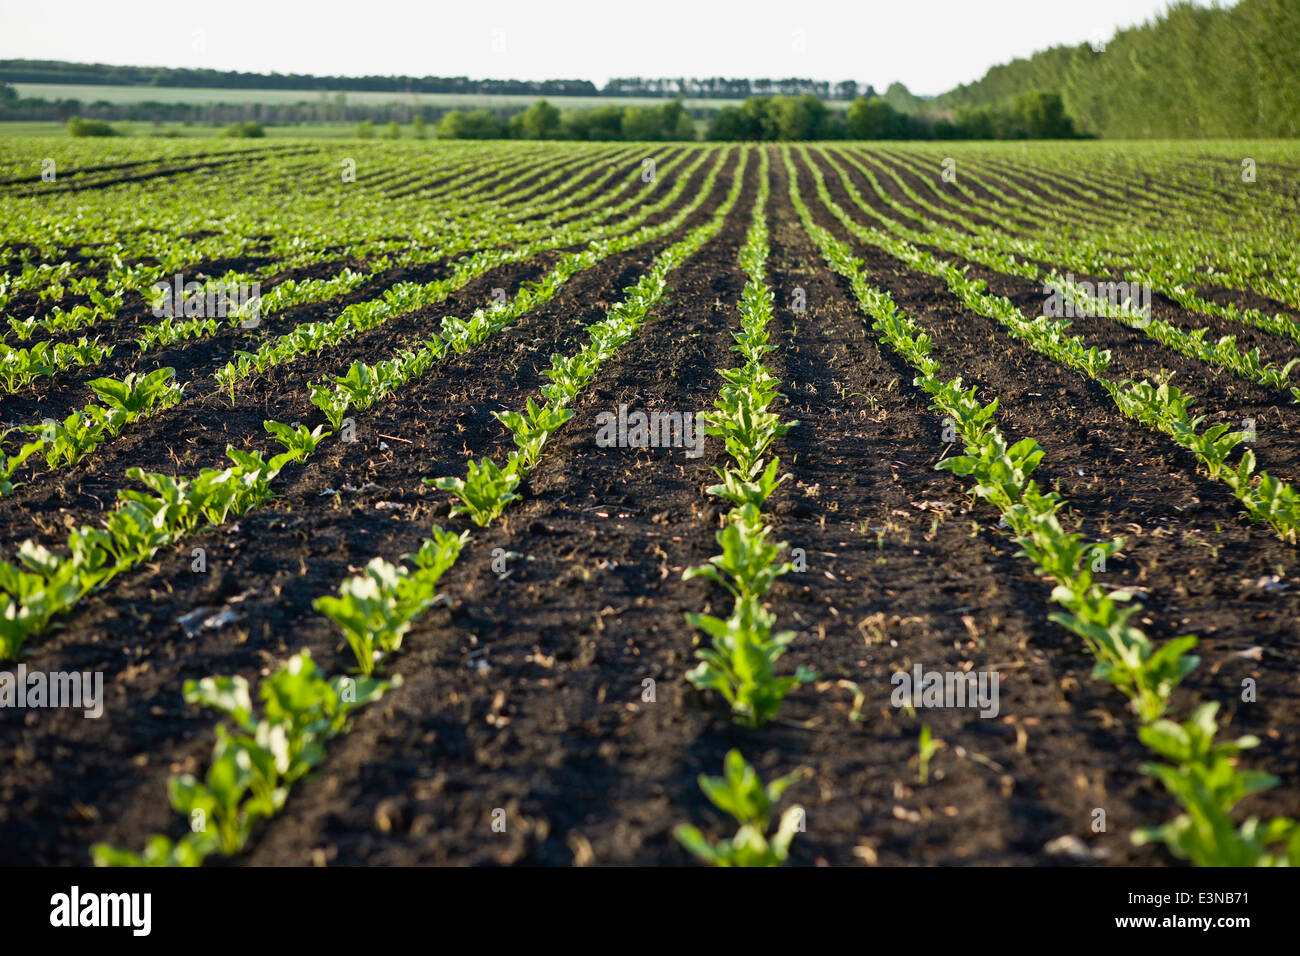 Rows of new crops growing in a field Stock Photo